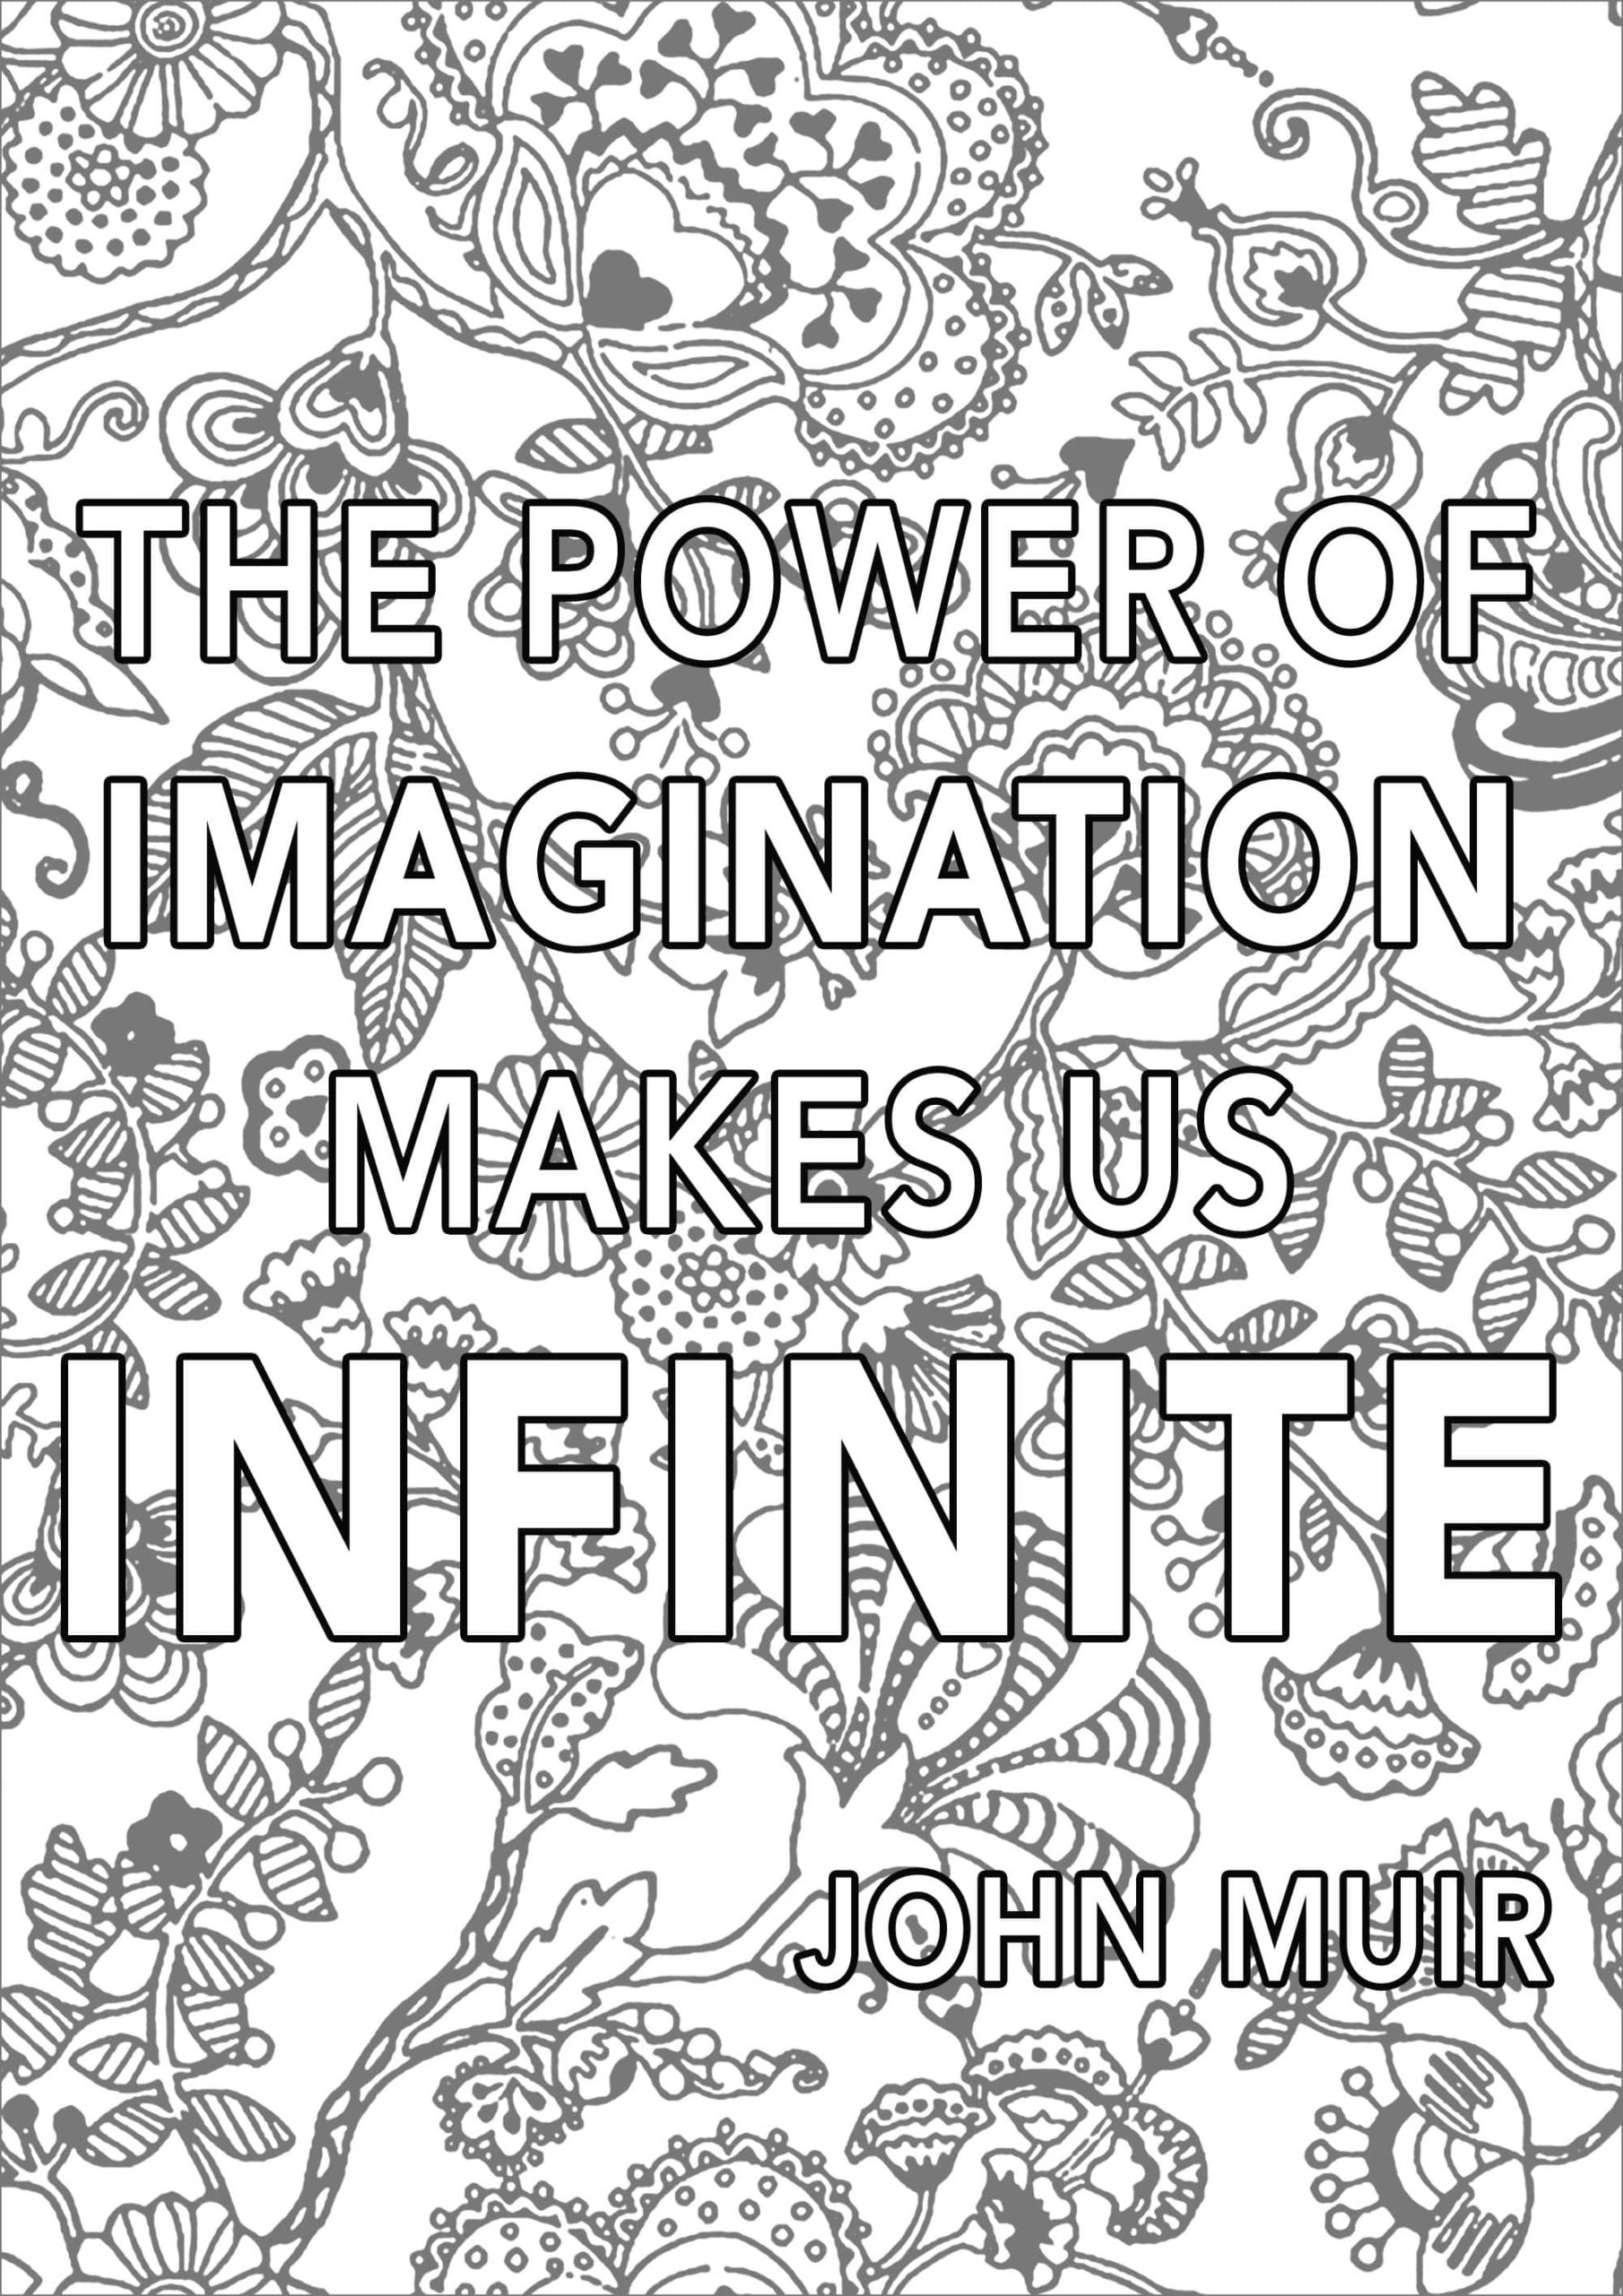 20 Free Inspirational Coloring Pages for Adults   Happier Human